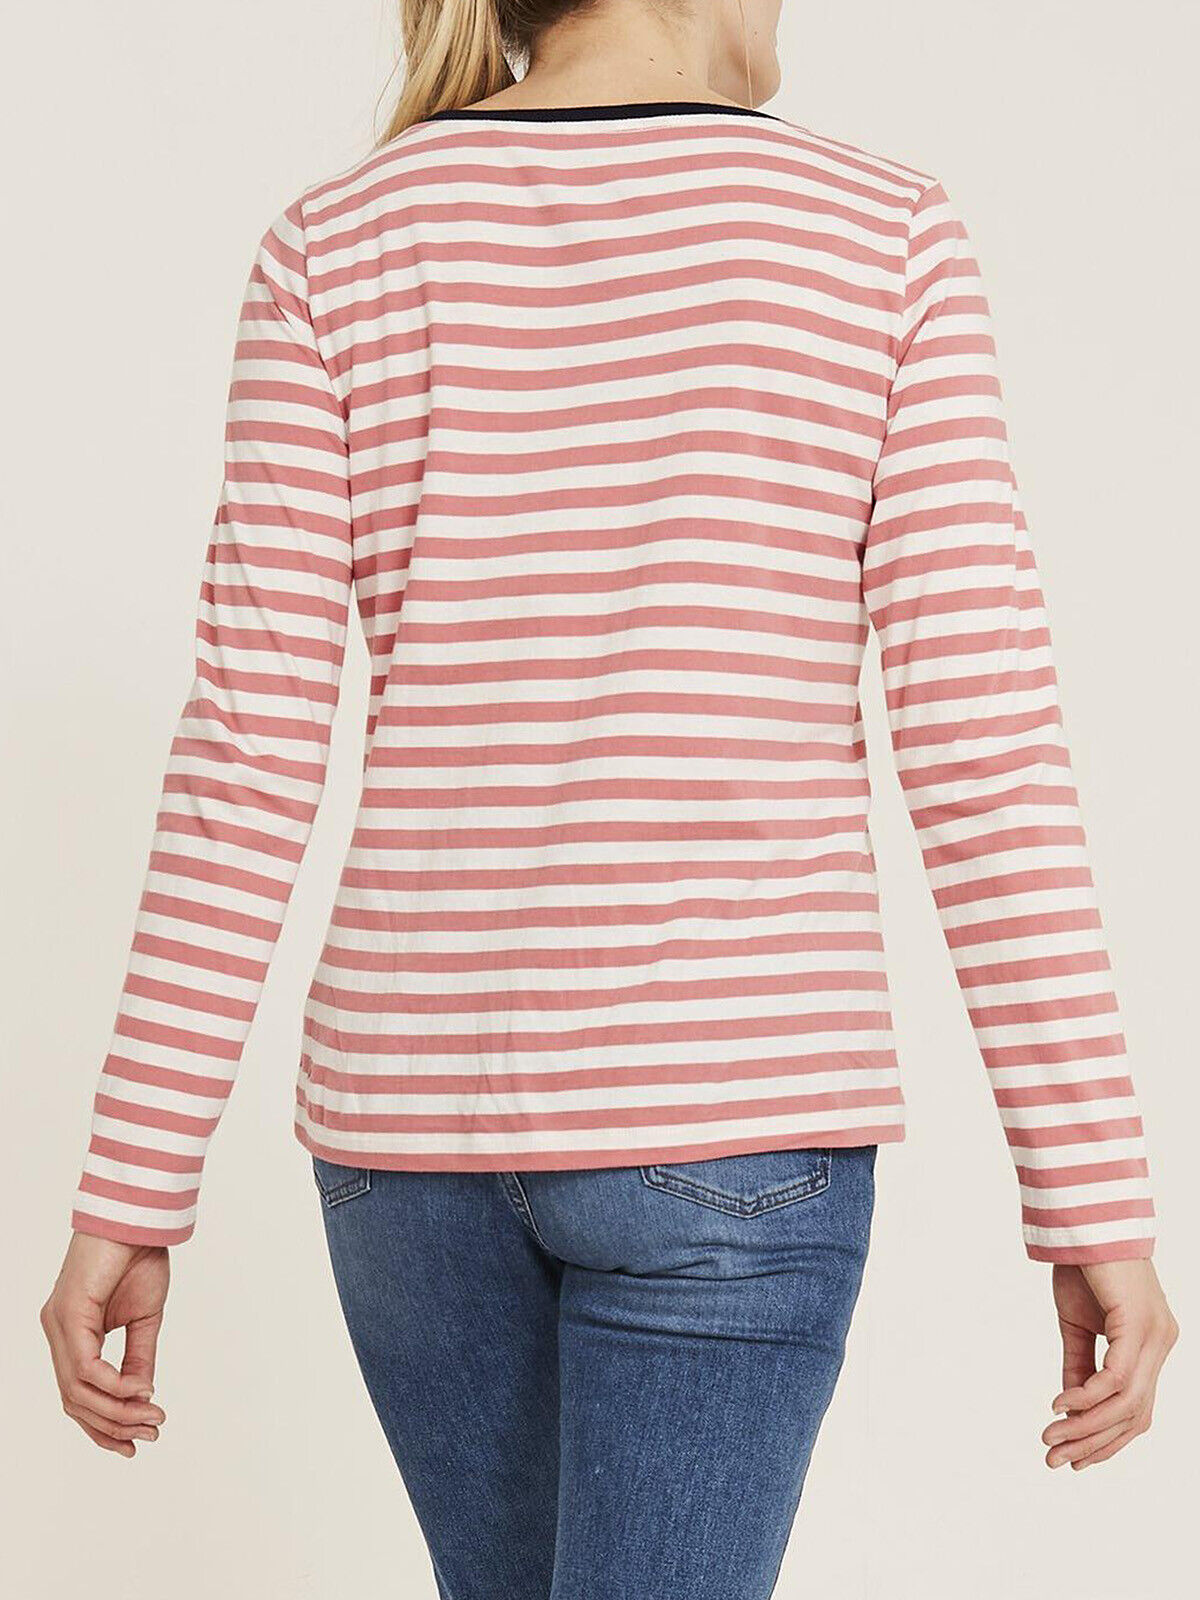 EX Fat Face Rosewood Cora Stripe Top in Size 12 RRP £22